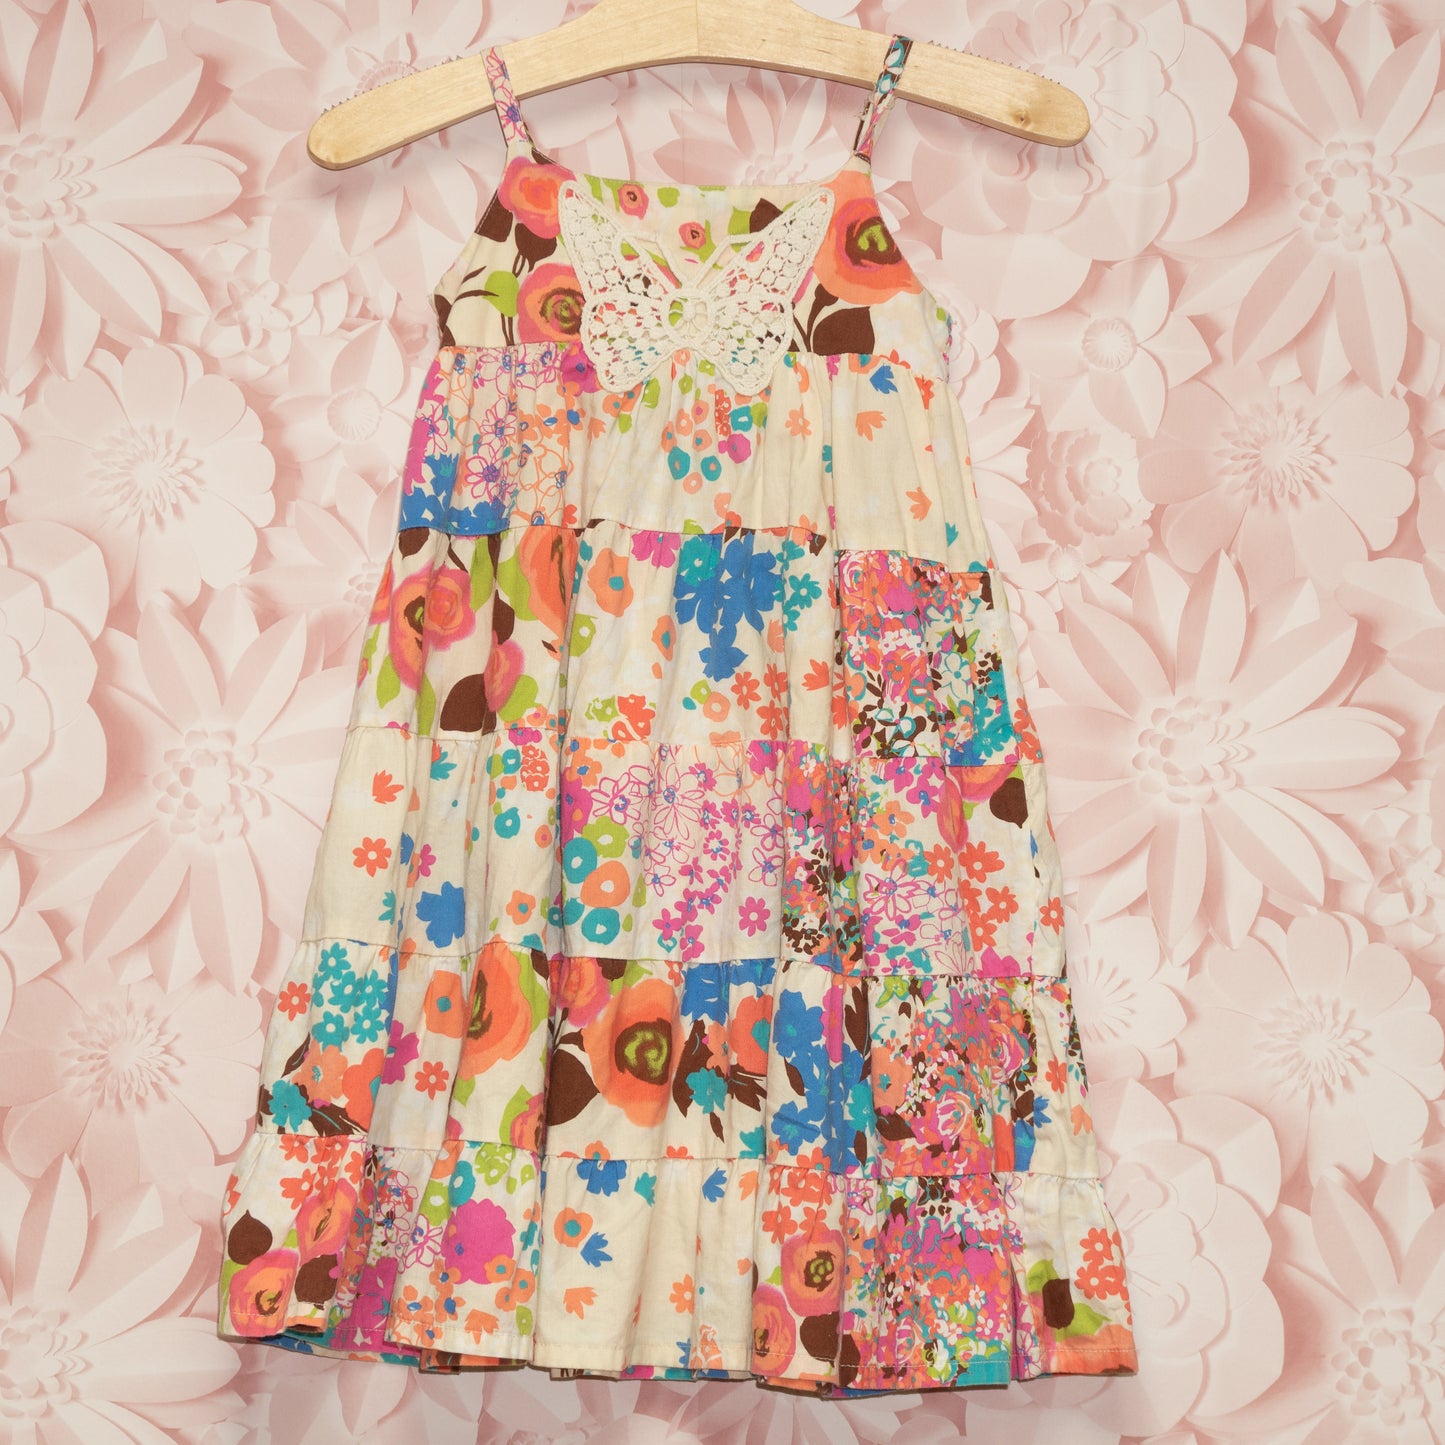 Tiered Butterly Dress Size 2T